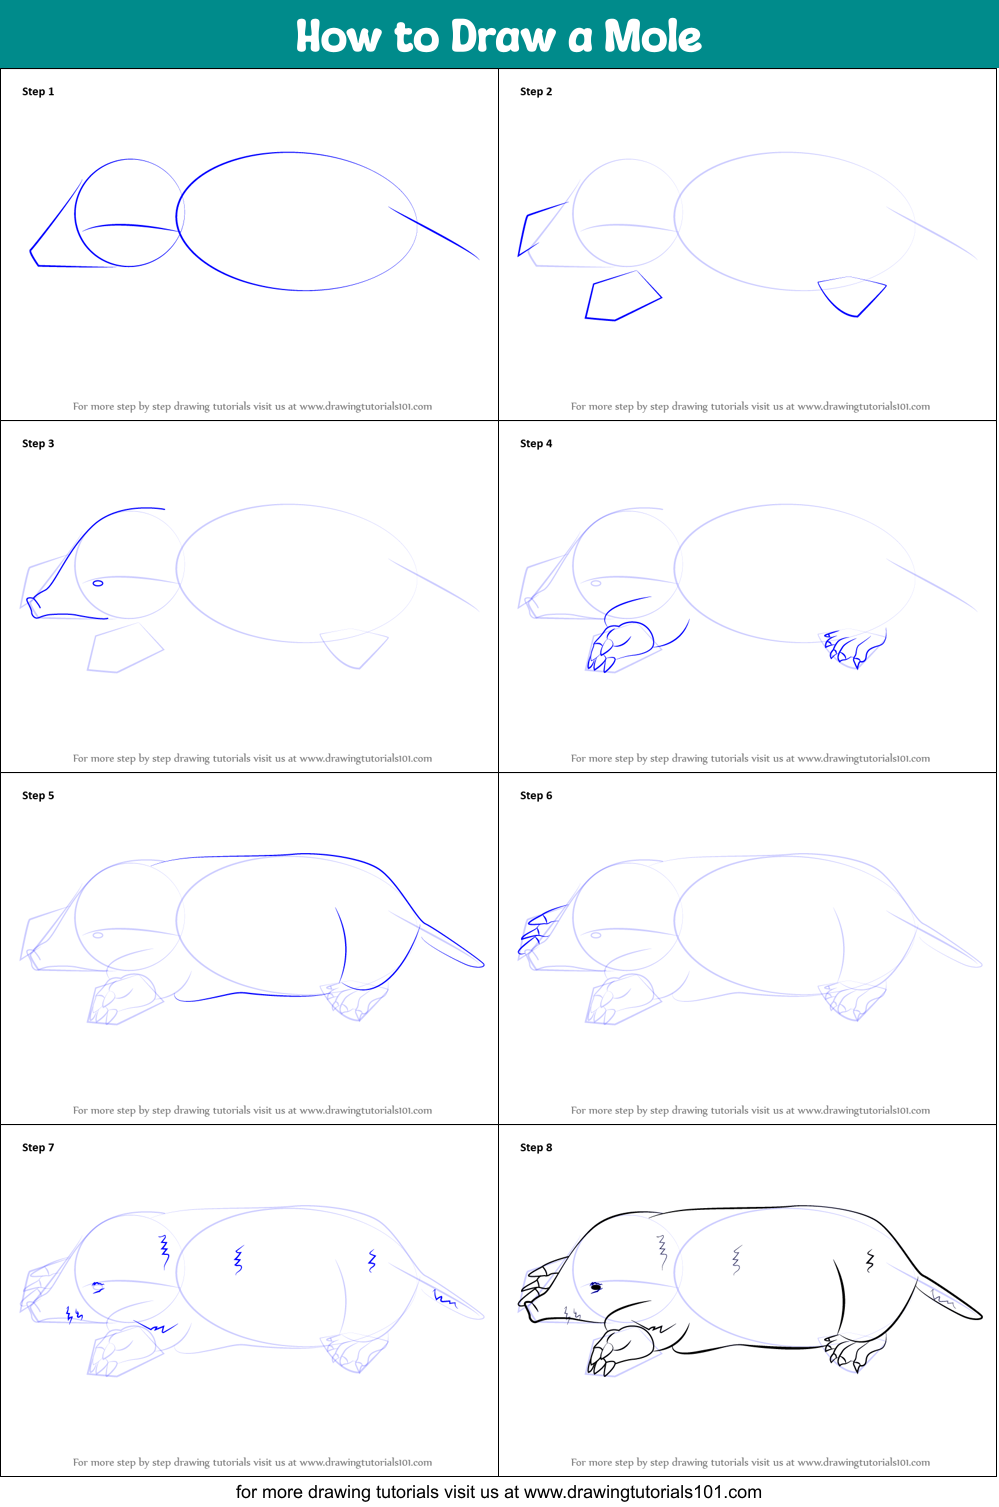 How to Draw a Mole printable step by step drawing sheet